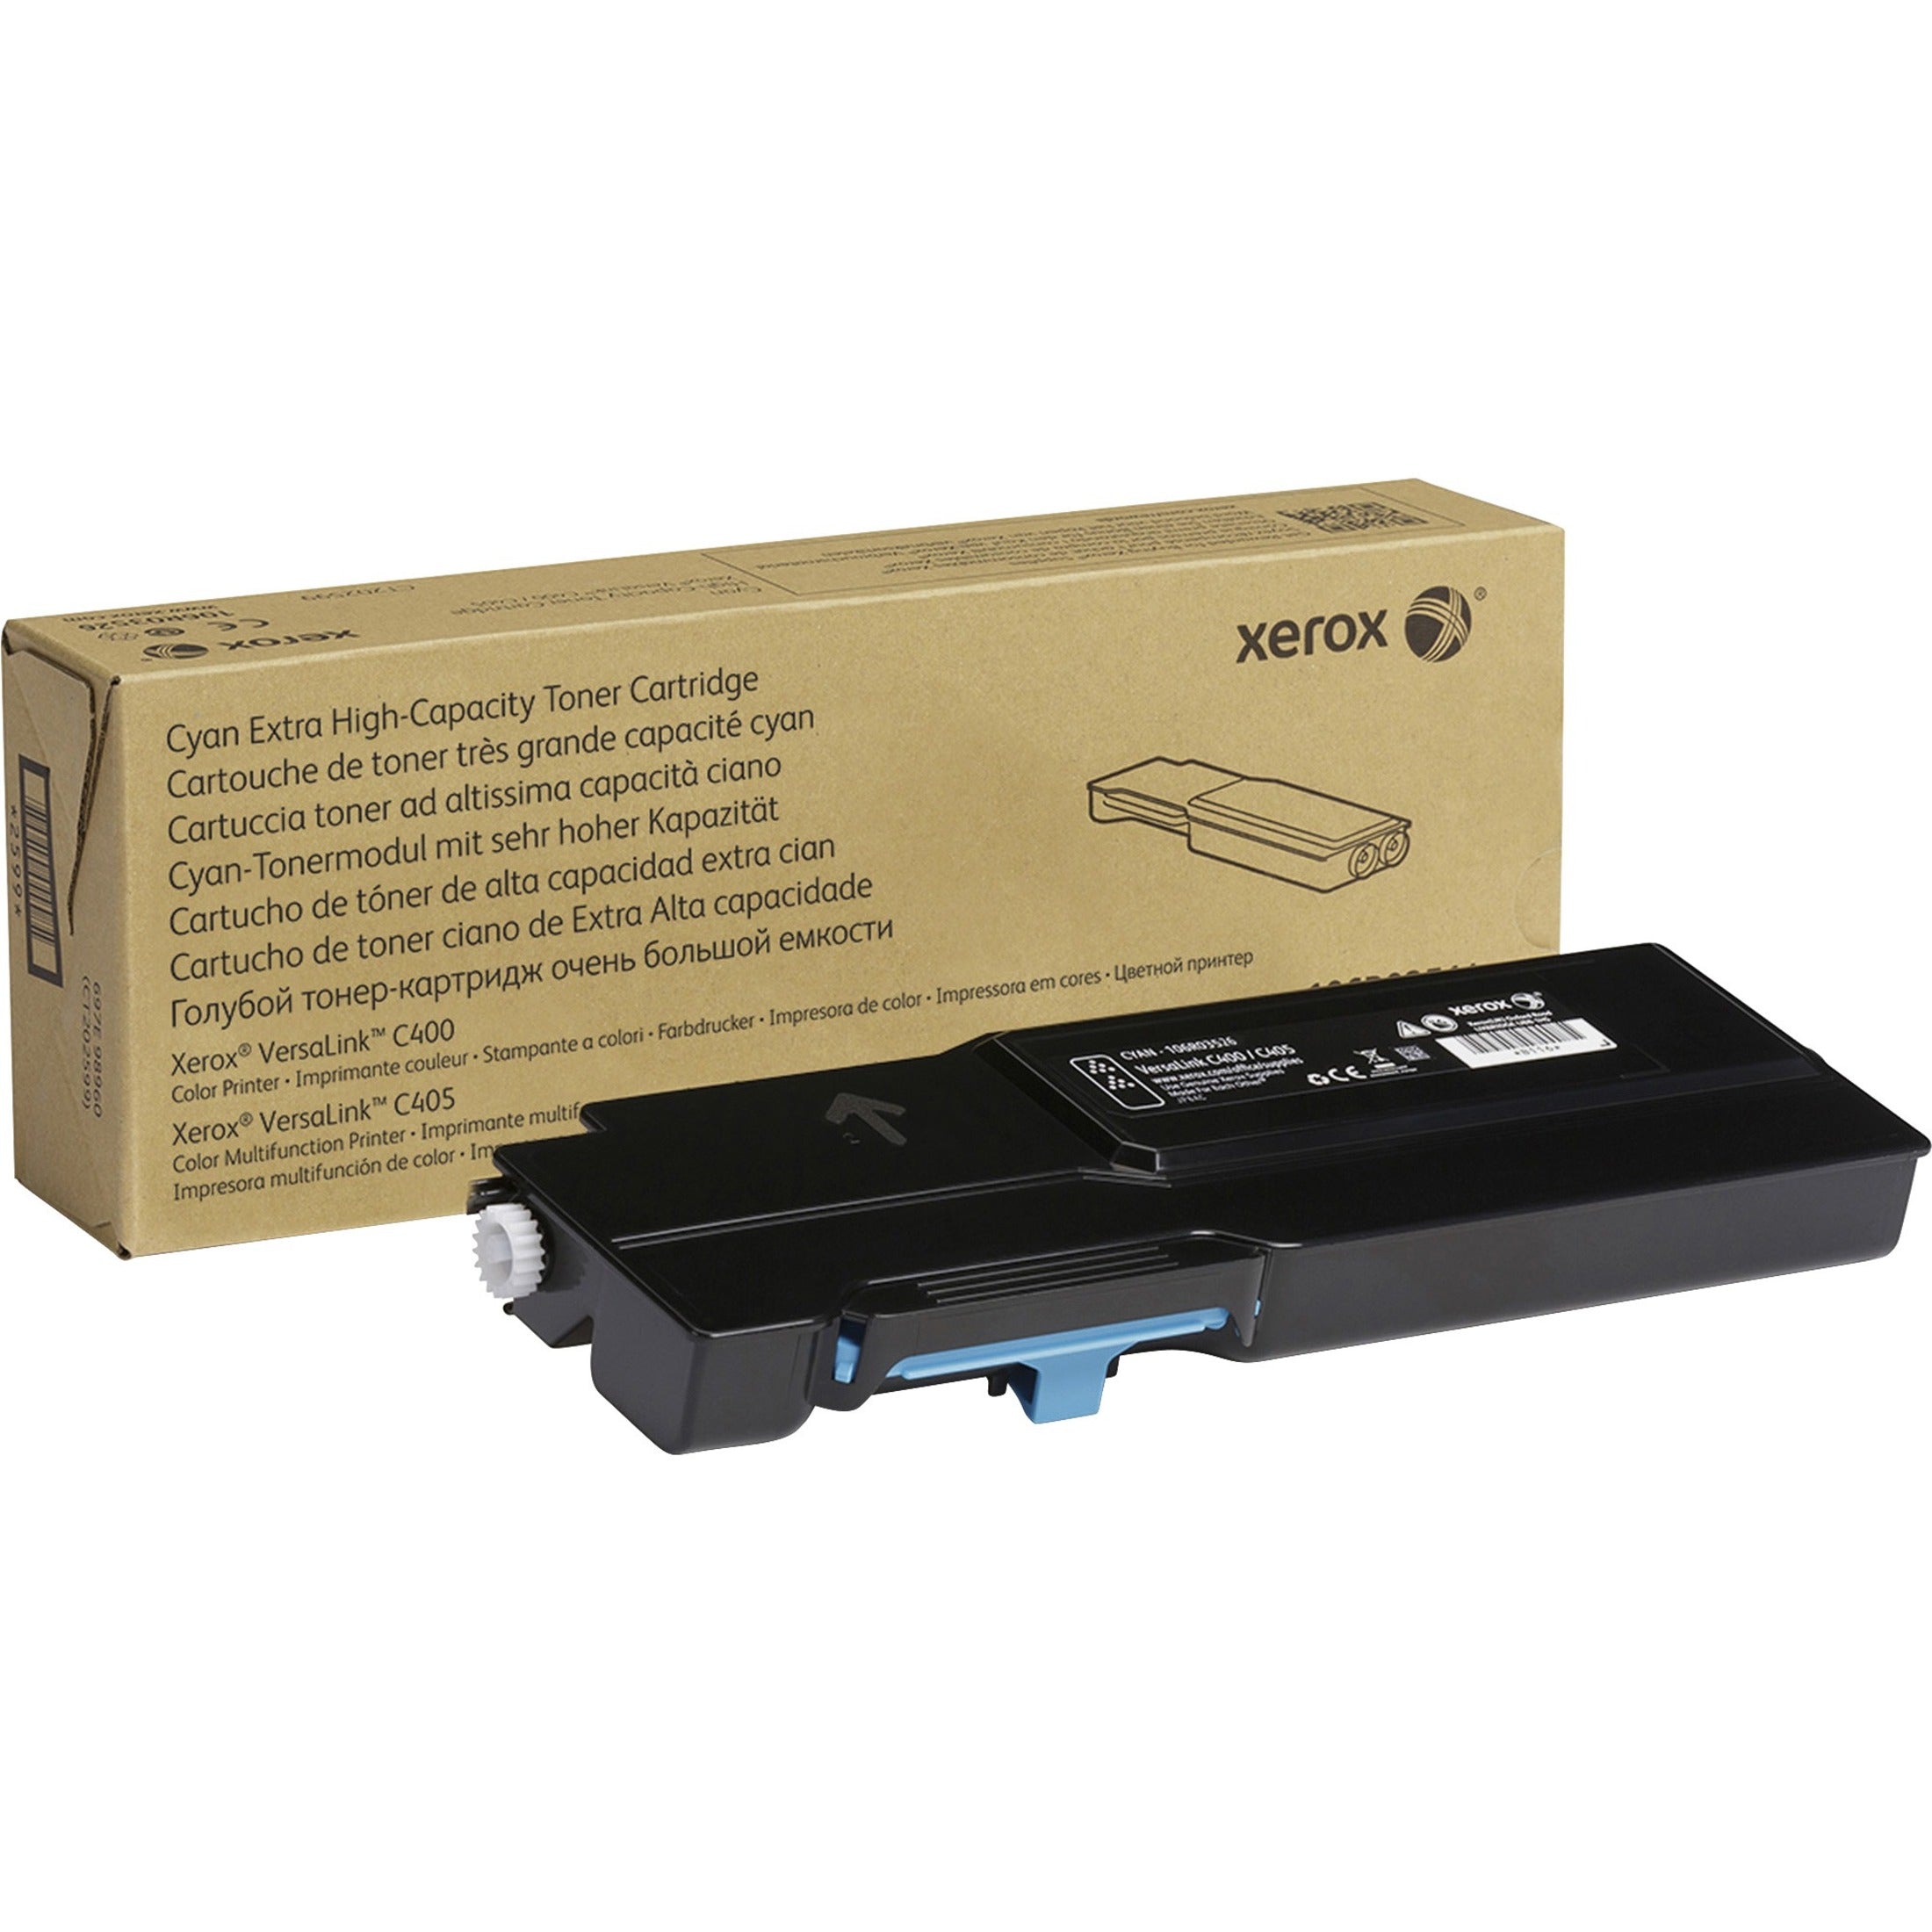 Xerox 106R03526 Genuine Cyan Extra High Capacity Toner Cartridge For The VersaLink C400/C405, 8000 Pages